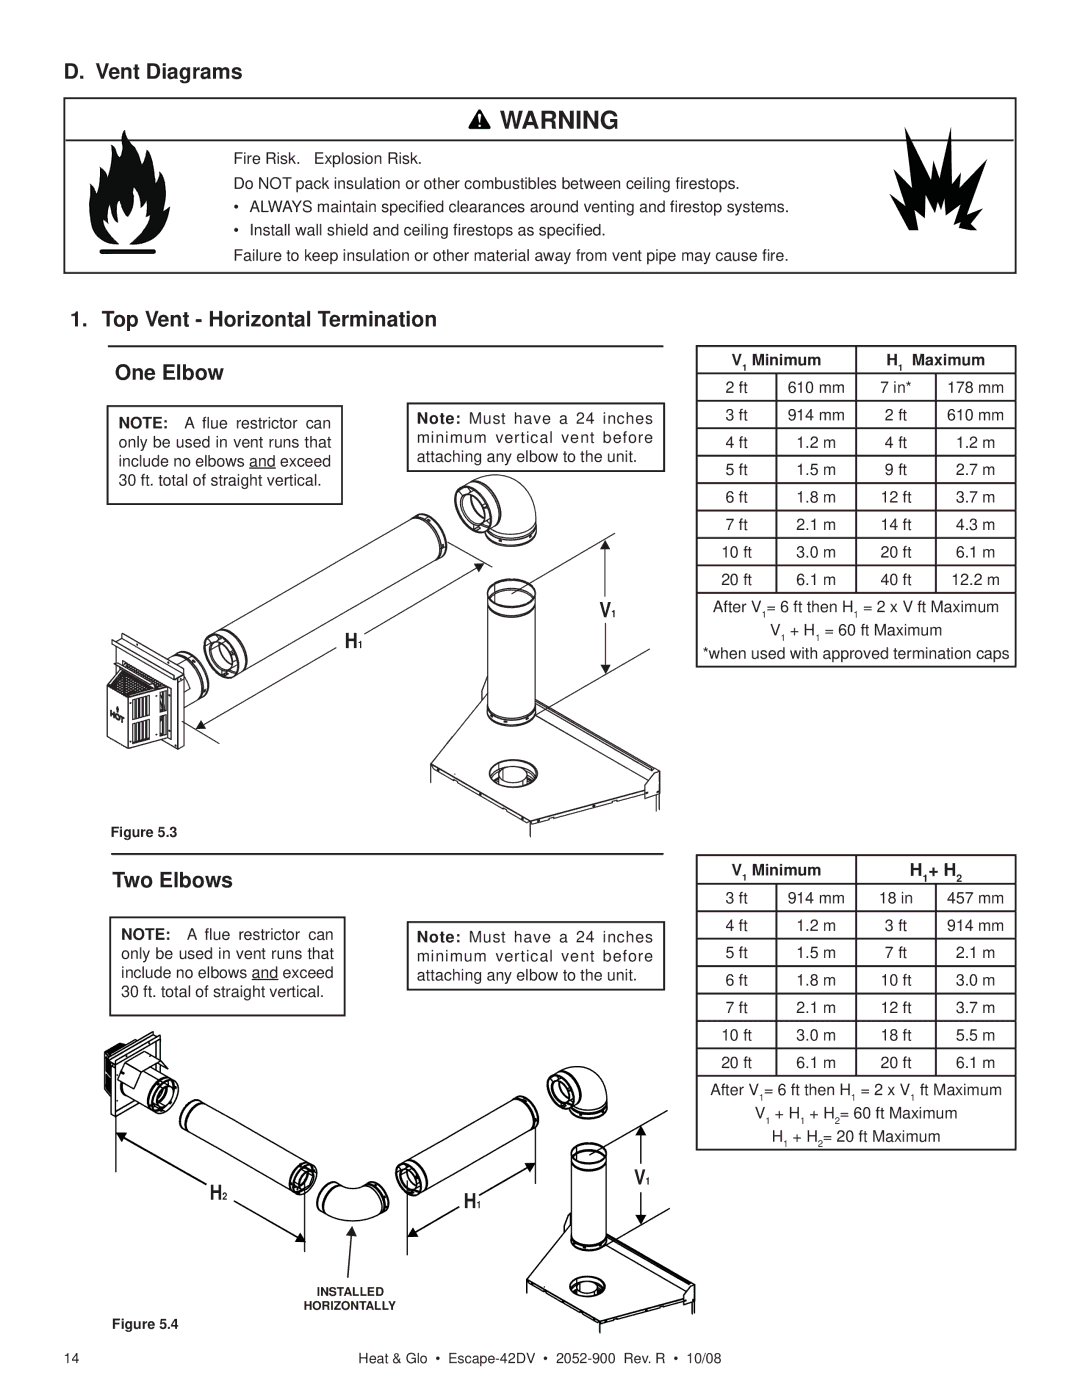 Hearth and Home Technologies ESCAPE-42DV Vent Diagrams, Top Vent Horizontal Termination One Elbow, Two Elbows, H1+ H2 